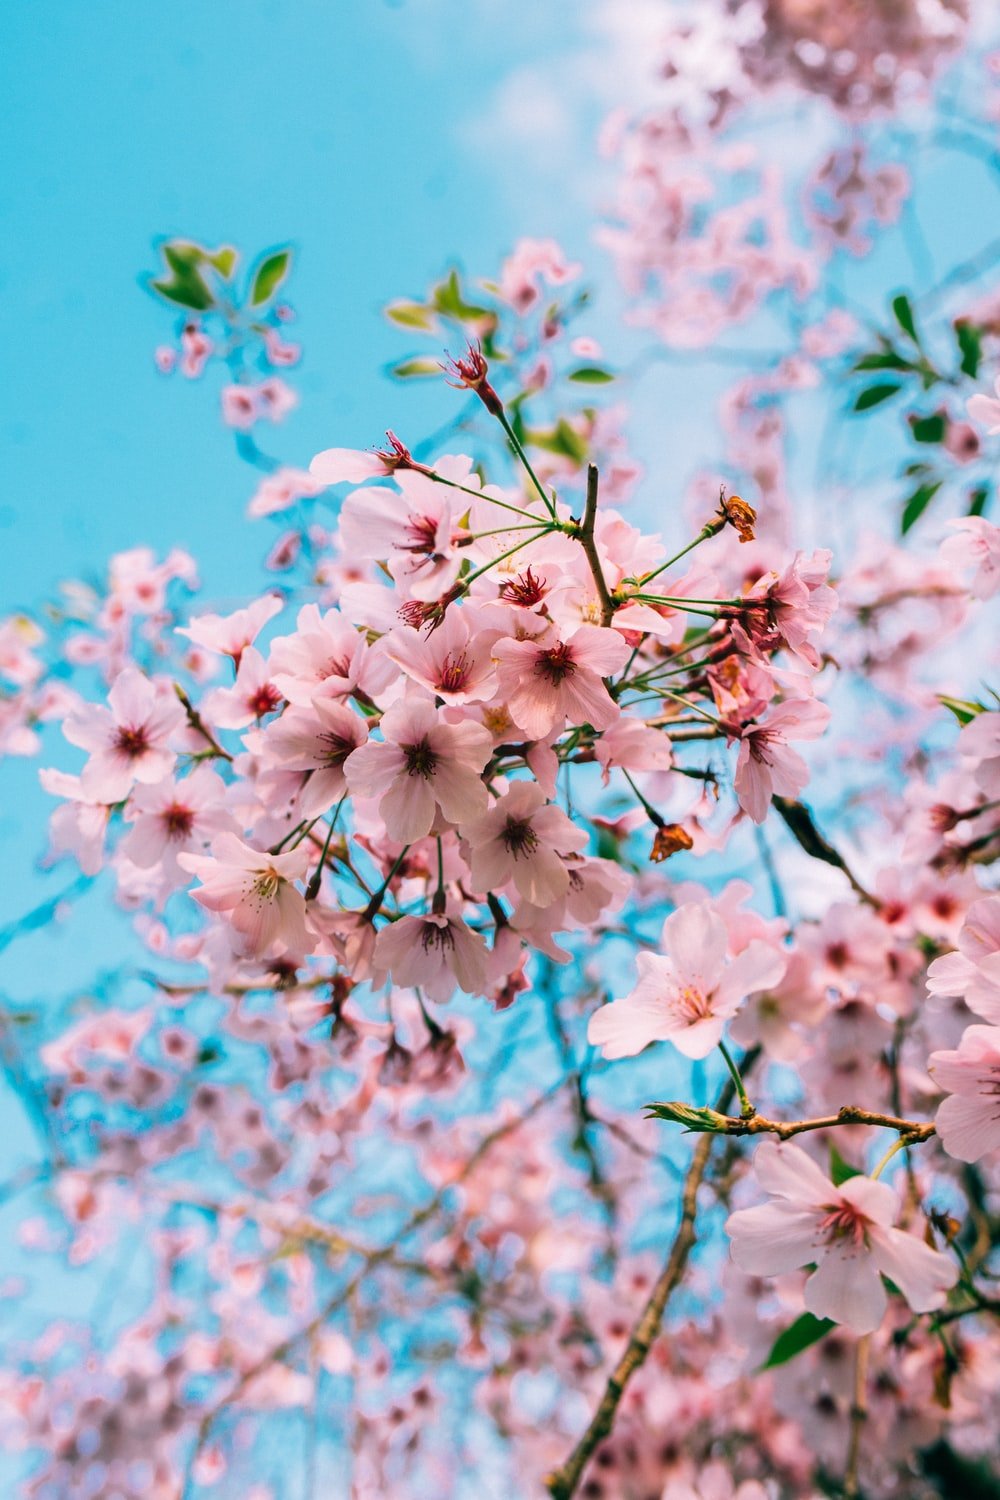 Cherry Blossom Picture. Download Free Image